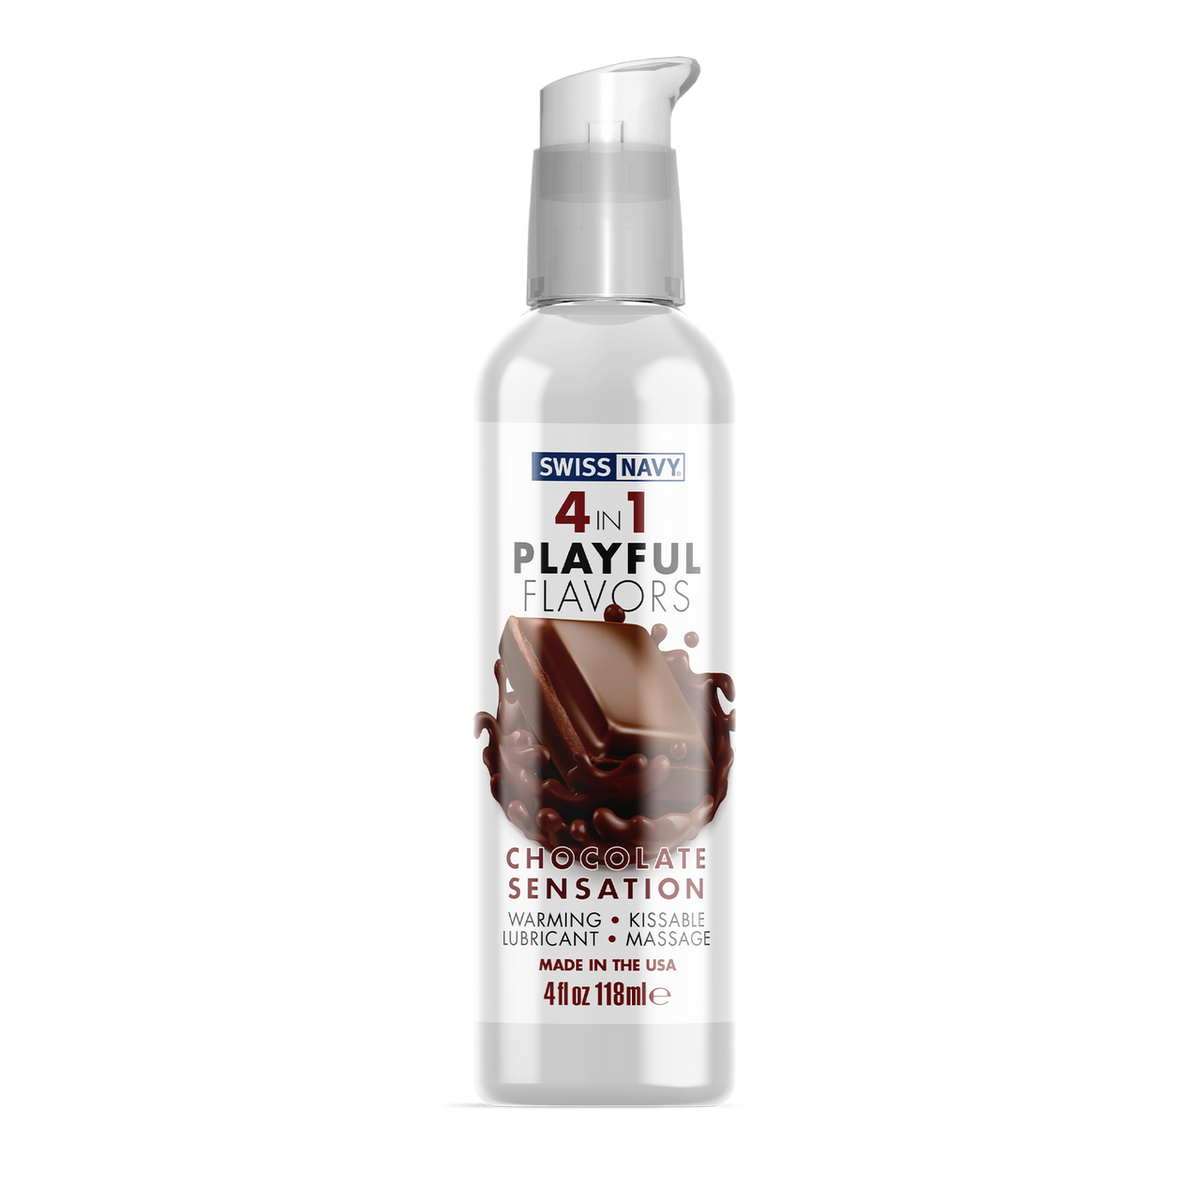 4 in 1 - Playful Flavors - Chocolate Sensation